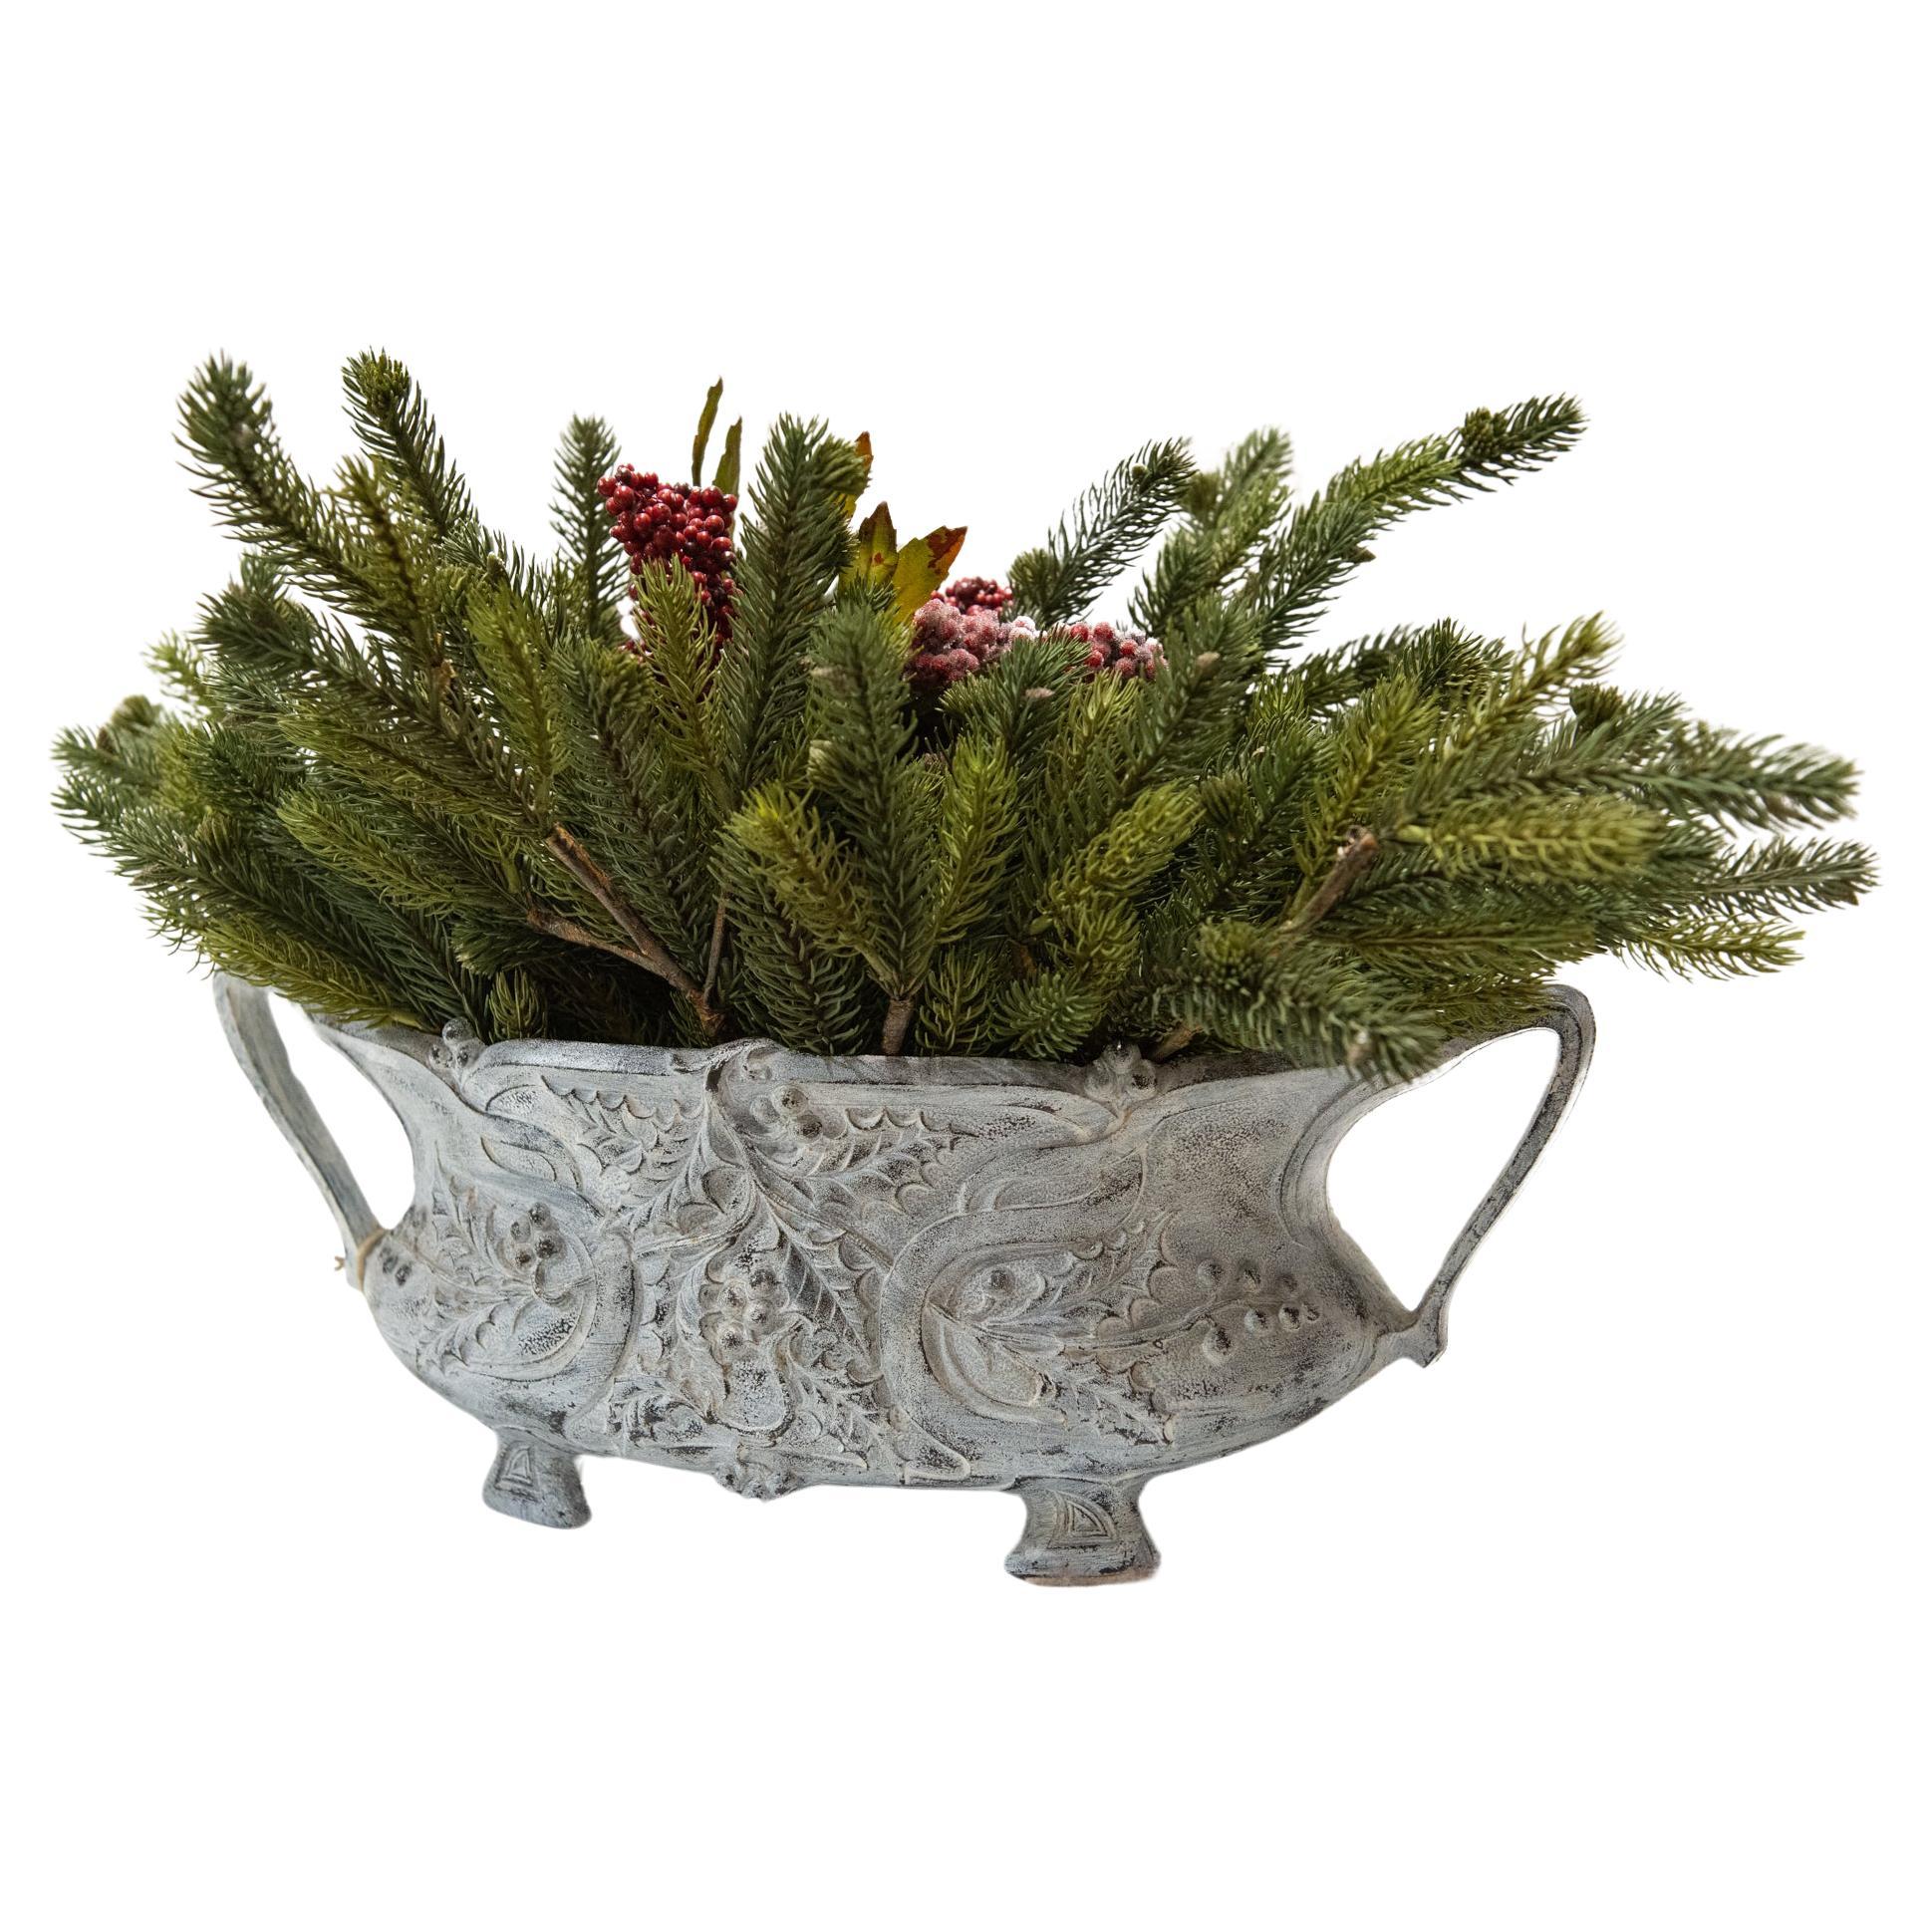 O/4857 -  Oval cast iron vase with handles, butcher's broom decoration: a typical winter subject. It's the classical Victorian cast iron jardiniere. I painted it white, but You can easily clean it if You want to see it dark.
There are holly leaves